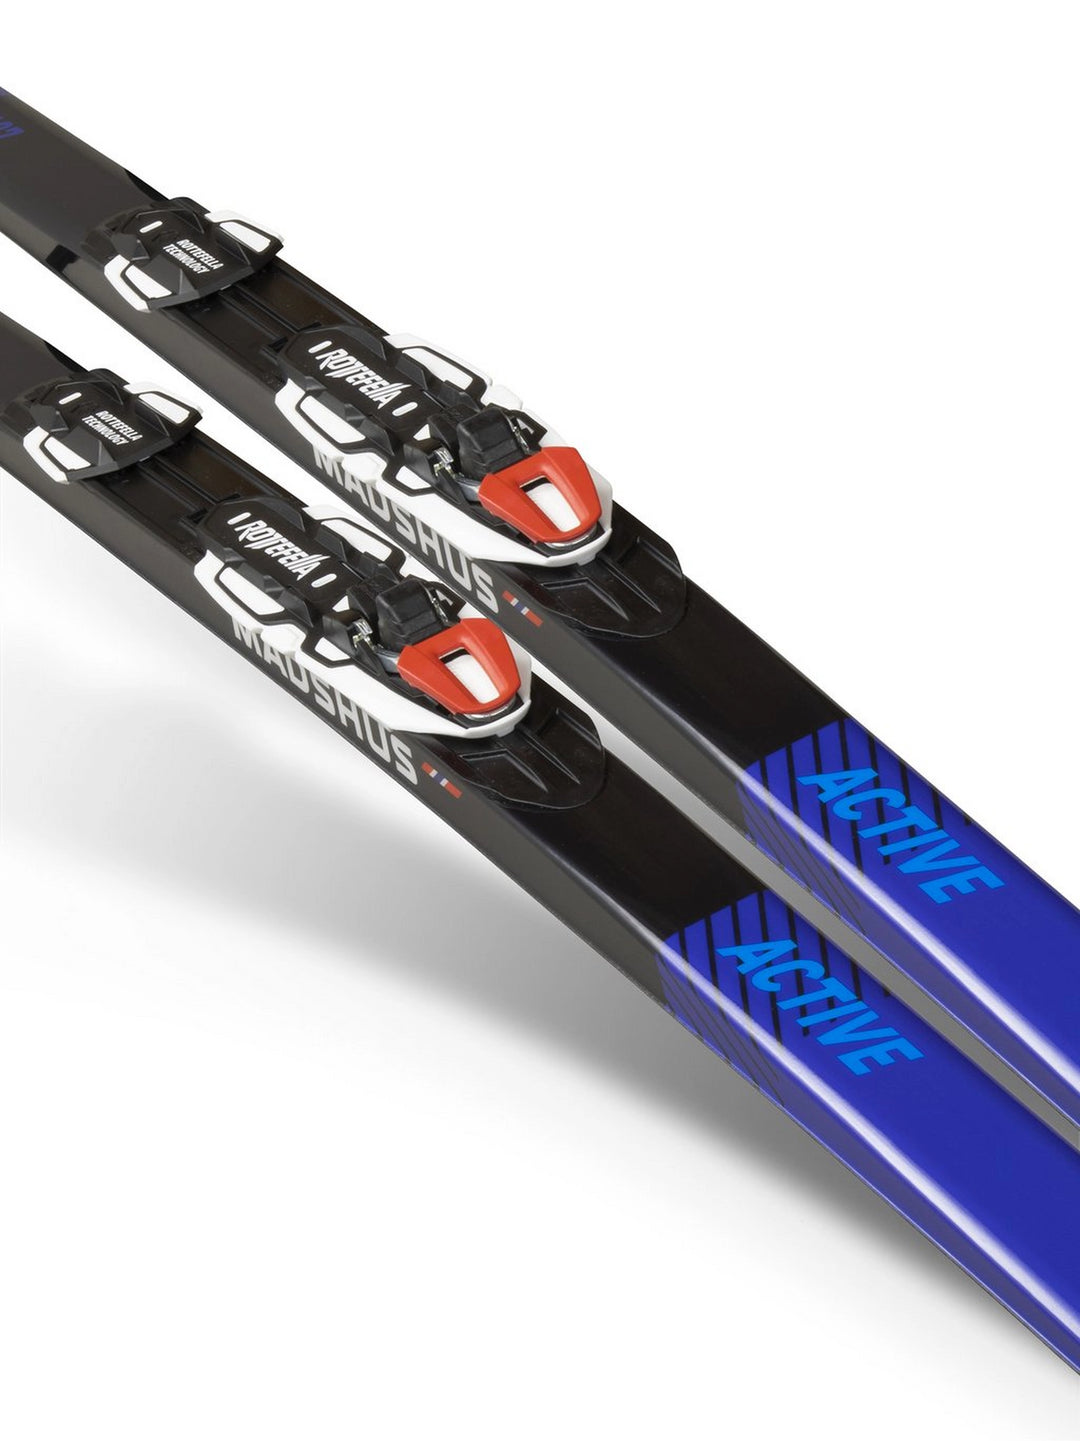 Madshus Active Skate With Rottefella Performance Skate Skis